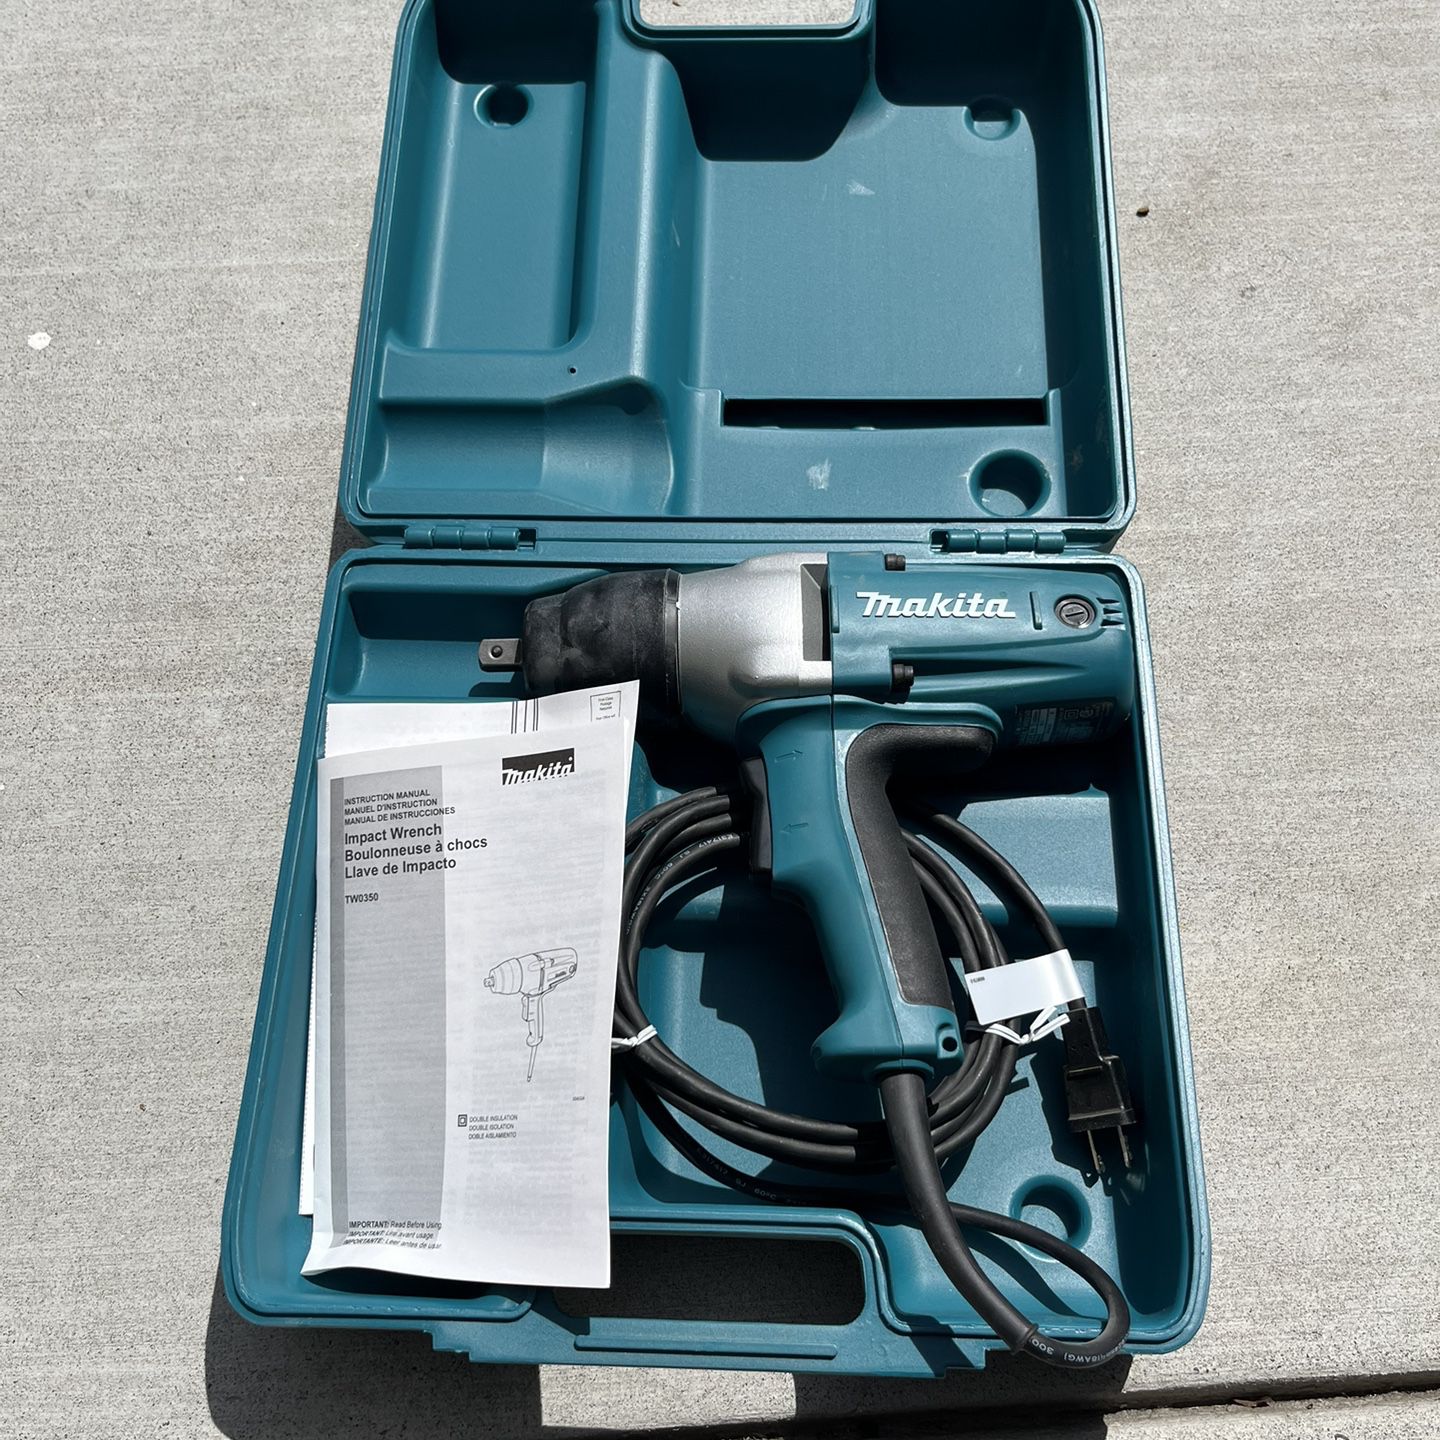 Makita 1/2 Impact Wrench Corded Electric Power Tool